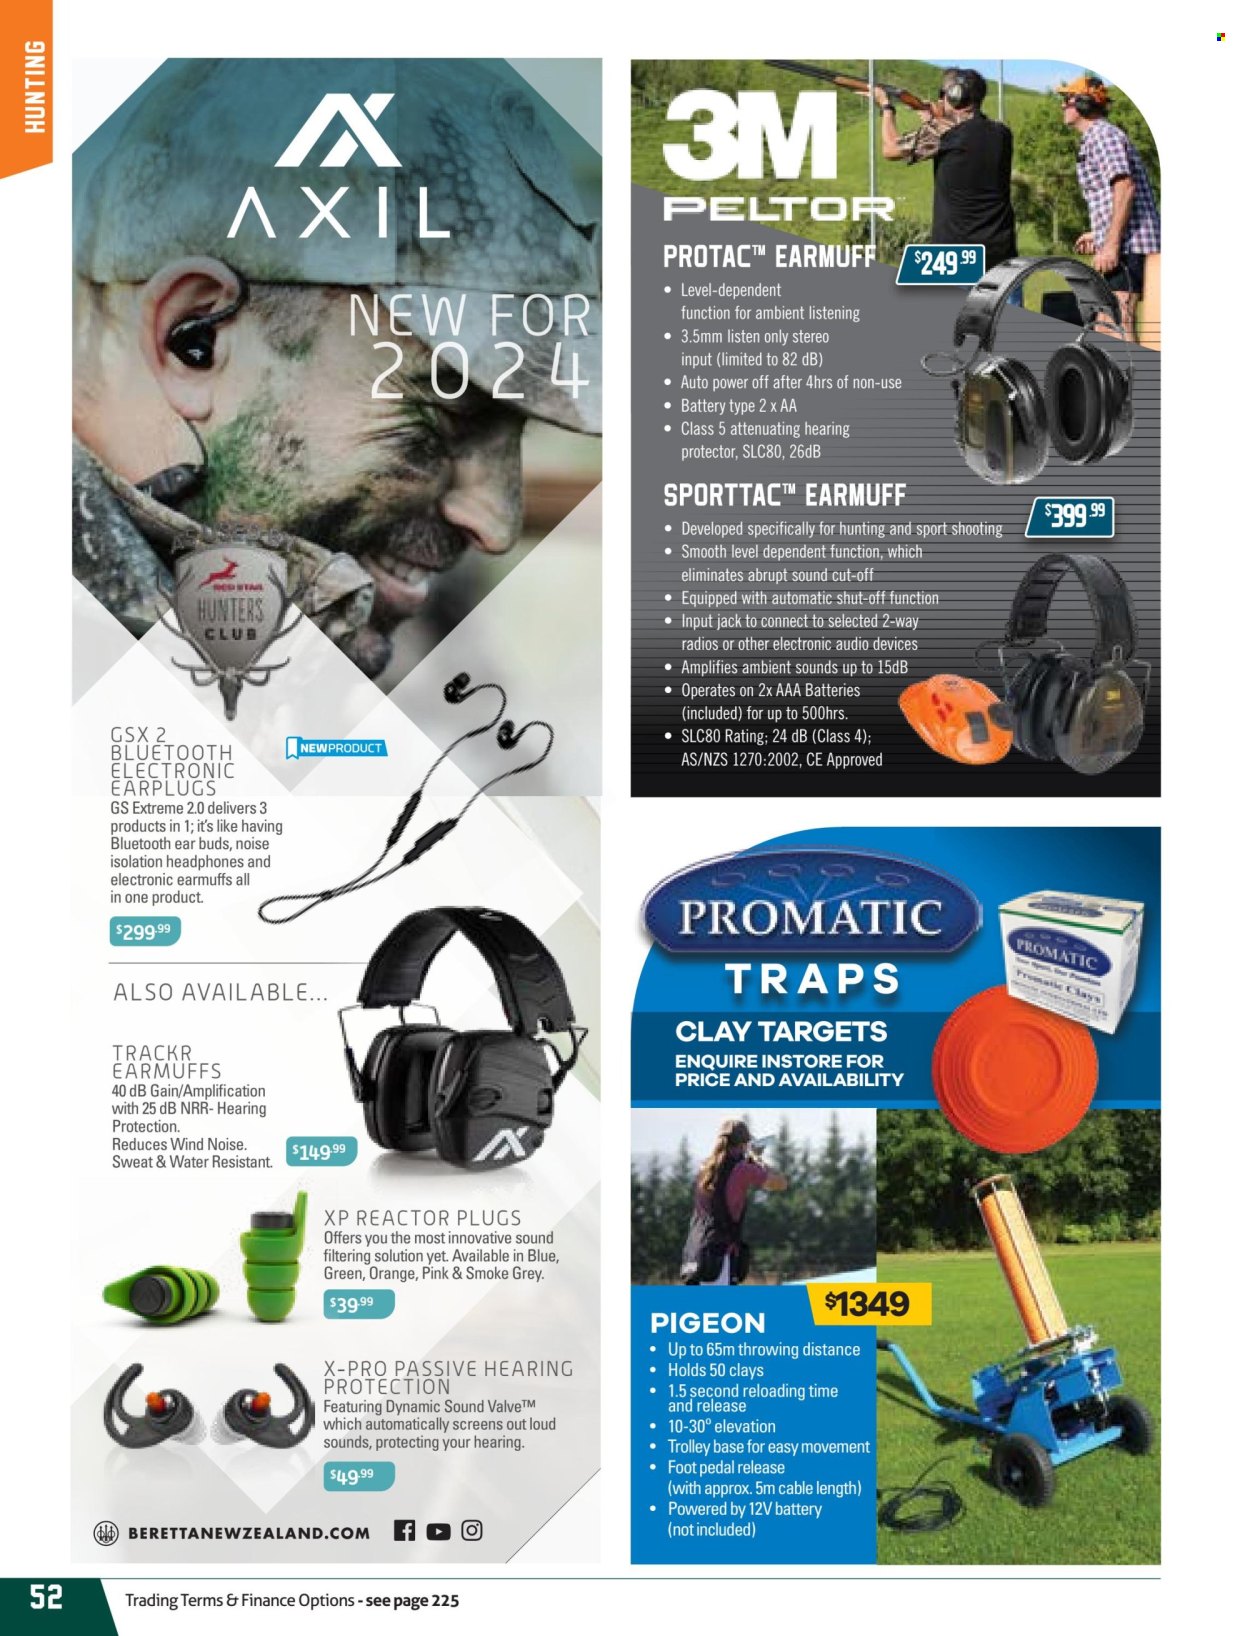 thumbnail - Hunting & Fishing mailer - Sales products - Pigeon, earmuffs, trolley, hearing protection. Page 52.